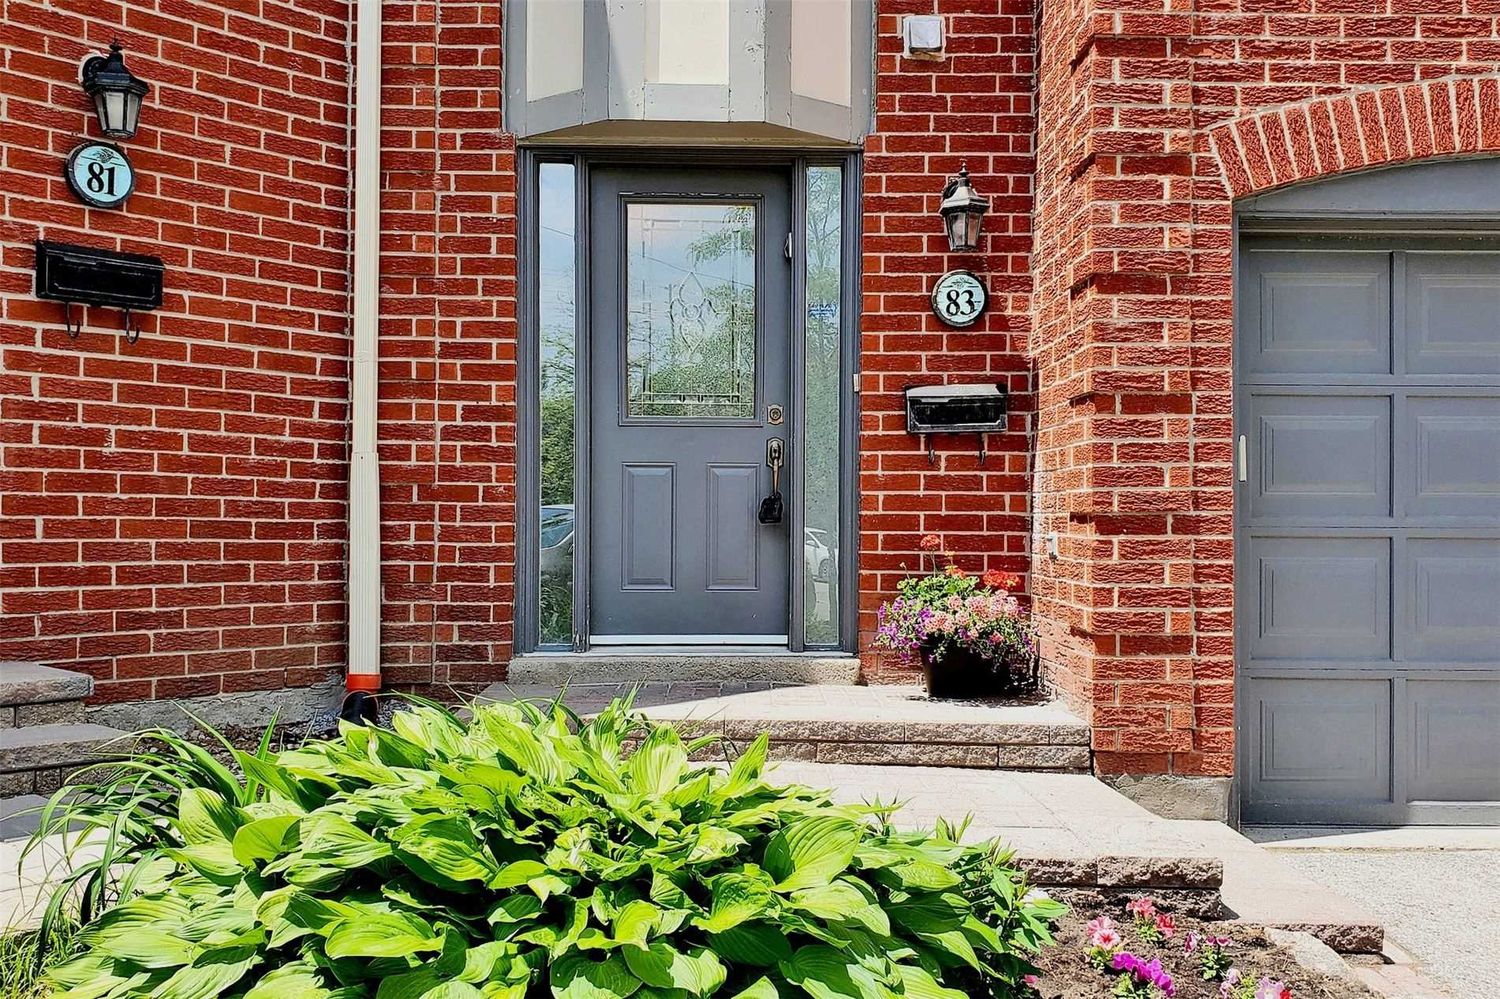 1-88 Beaumont Place. Beaumont Place Townhomes is located in  Vaughan, Toronto - image #3 of 3